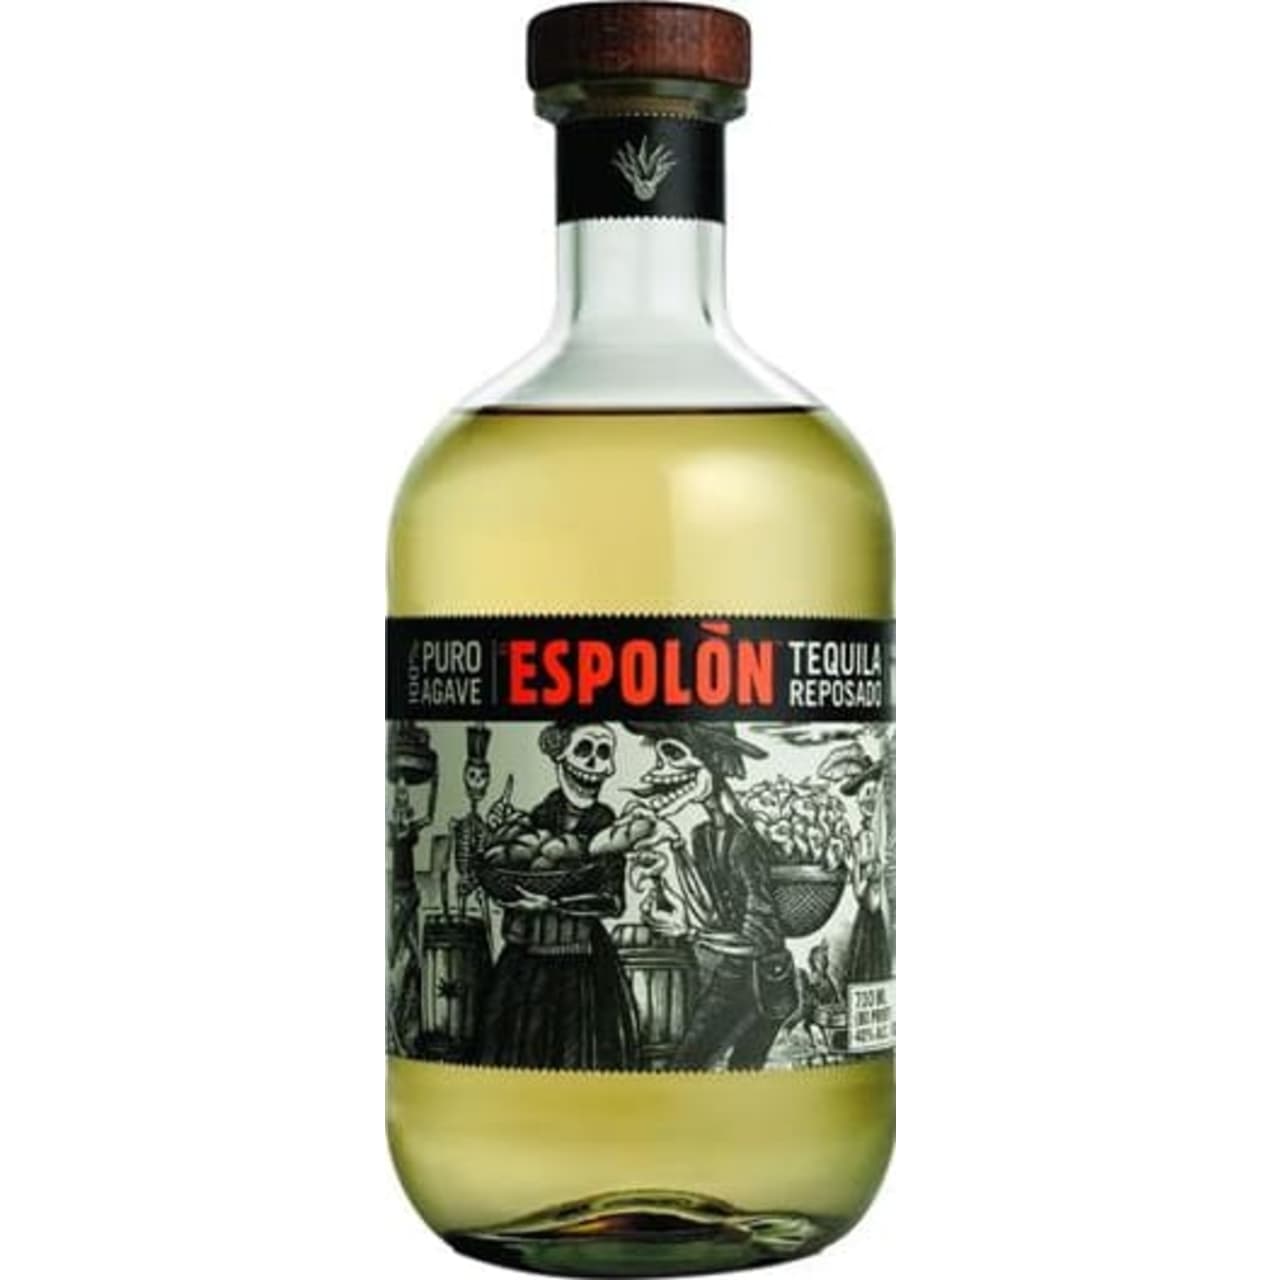 This Reposado Tequila from Espolon is made in Los Altos, the Highland region of Jalisco. It has been aged for 6 months in American oak barrels to mellow the spirit.